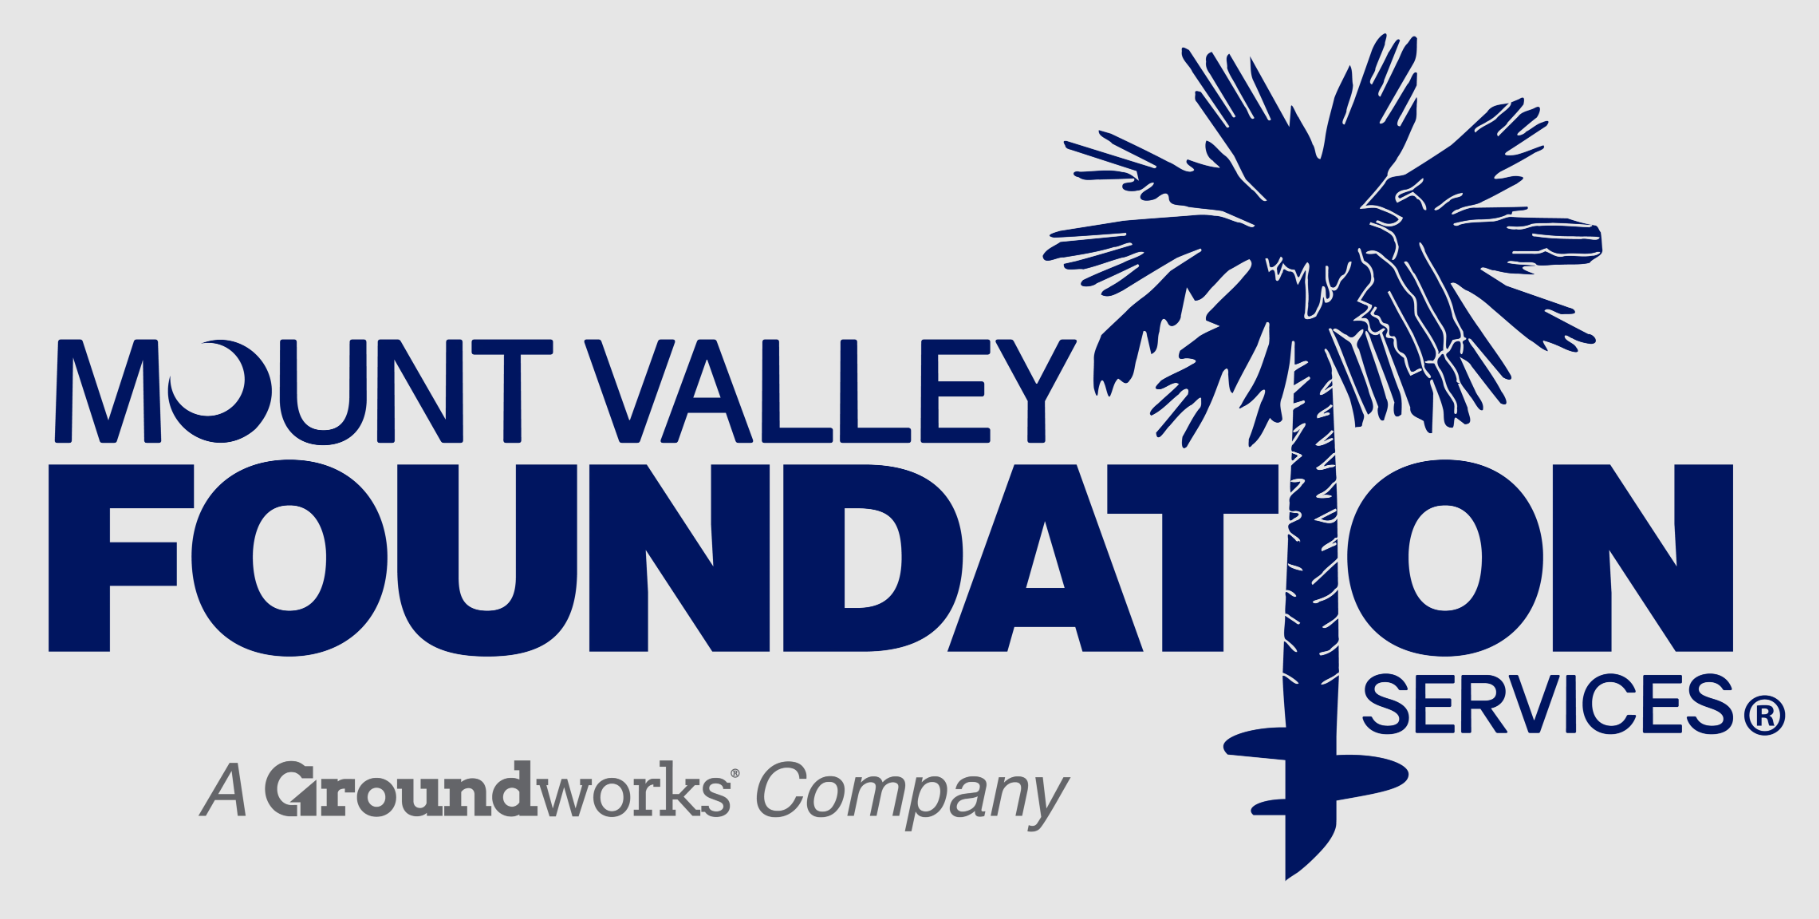 Mount Valley Foundation Services logo